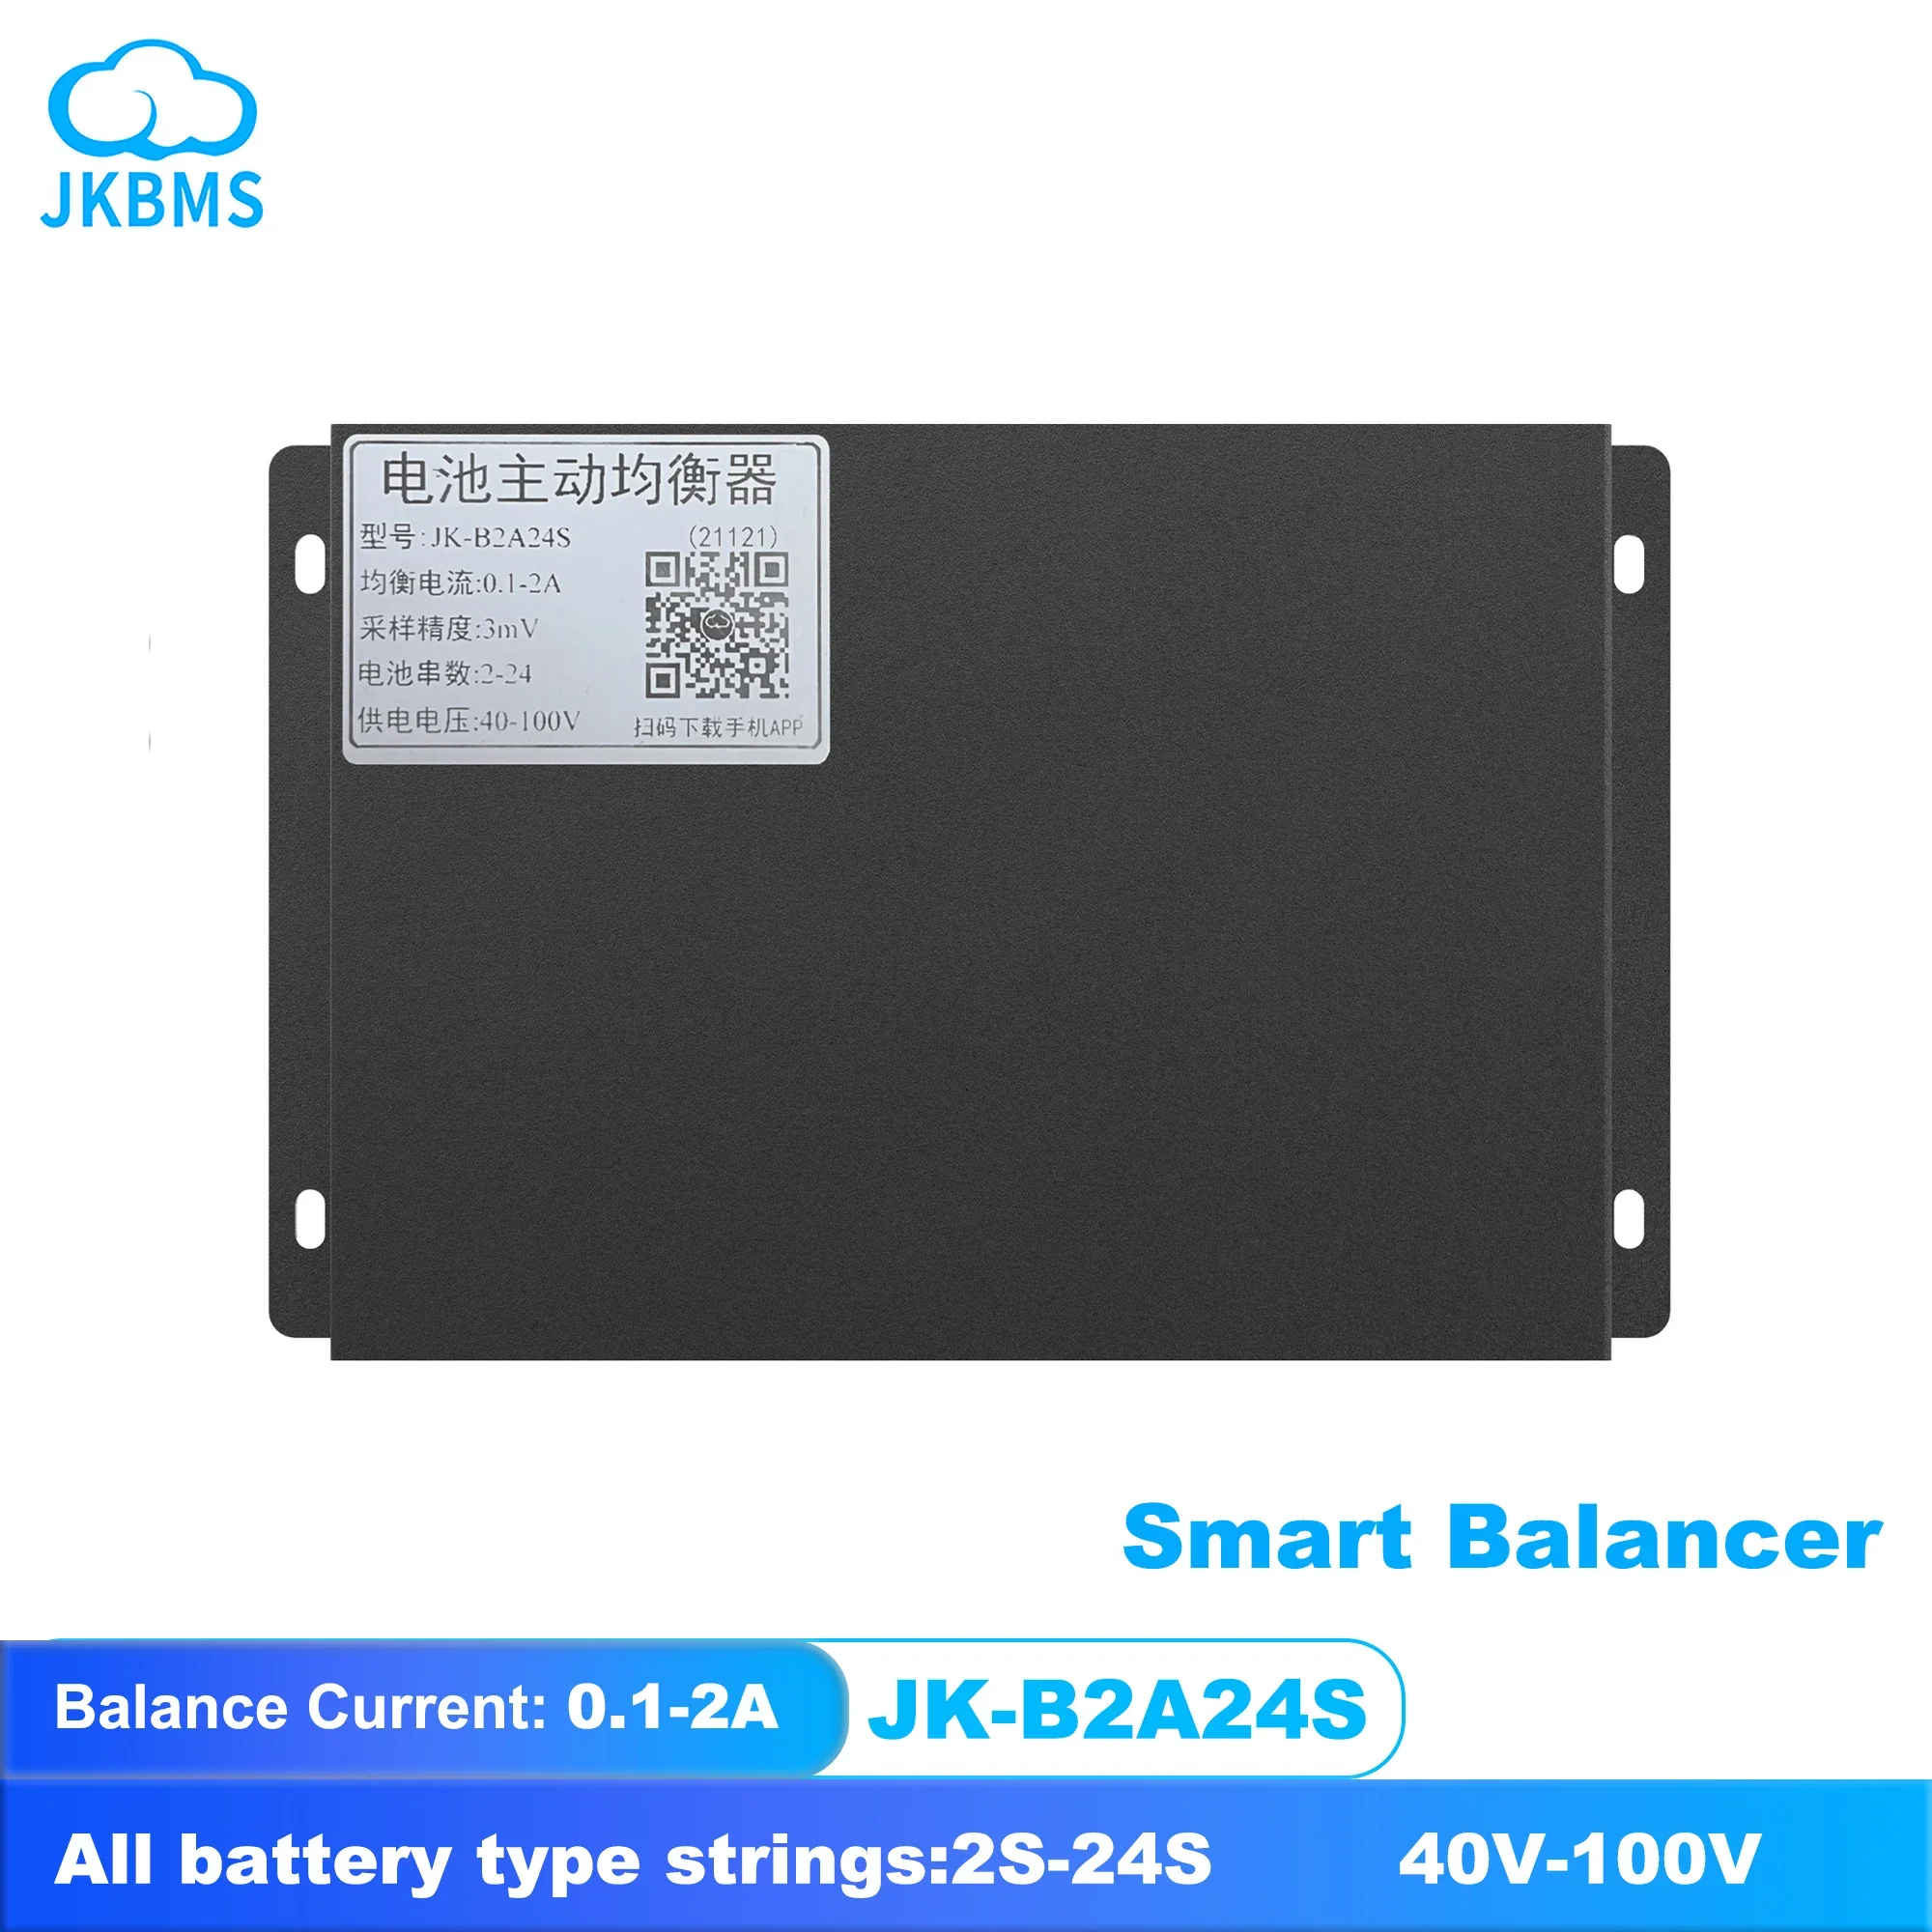 

JKBMS Active Smart Balancer RS485 CANBUS 4S 8S 14S 16S 24S 2A Paralleling Smart Active Balancer Bluetooth APP Li-ion Lifepo4 LTO